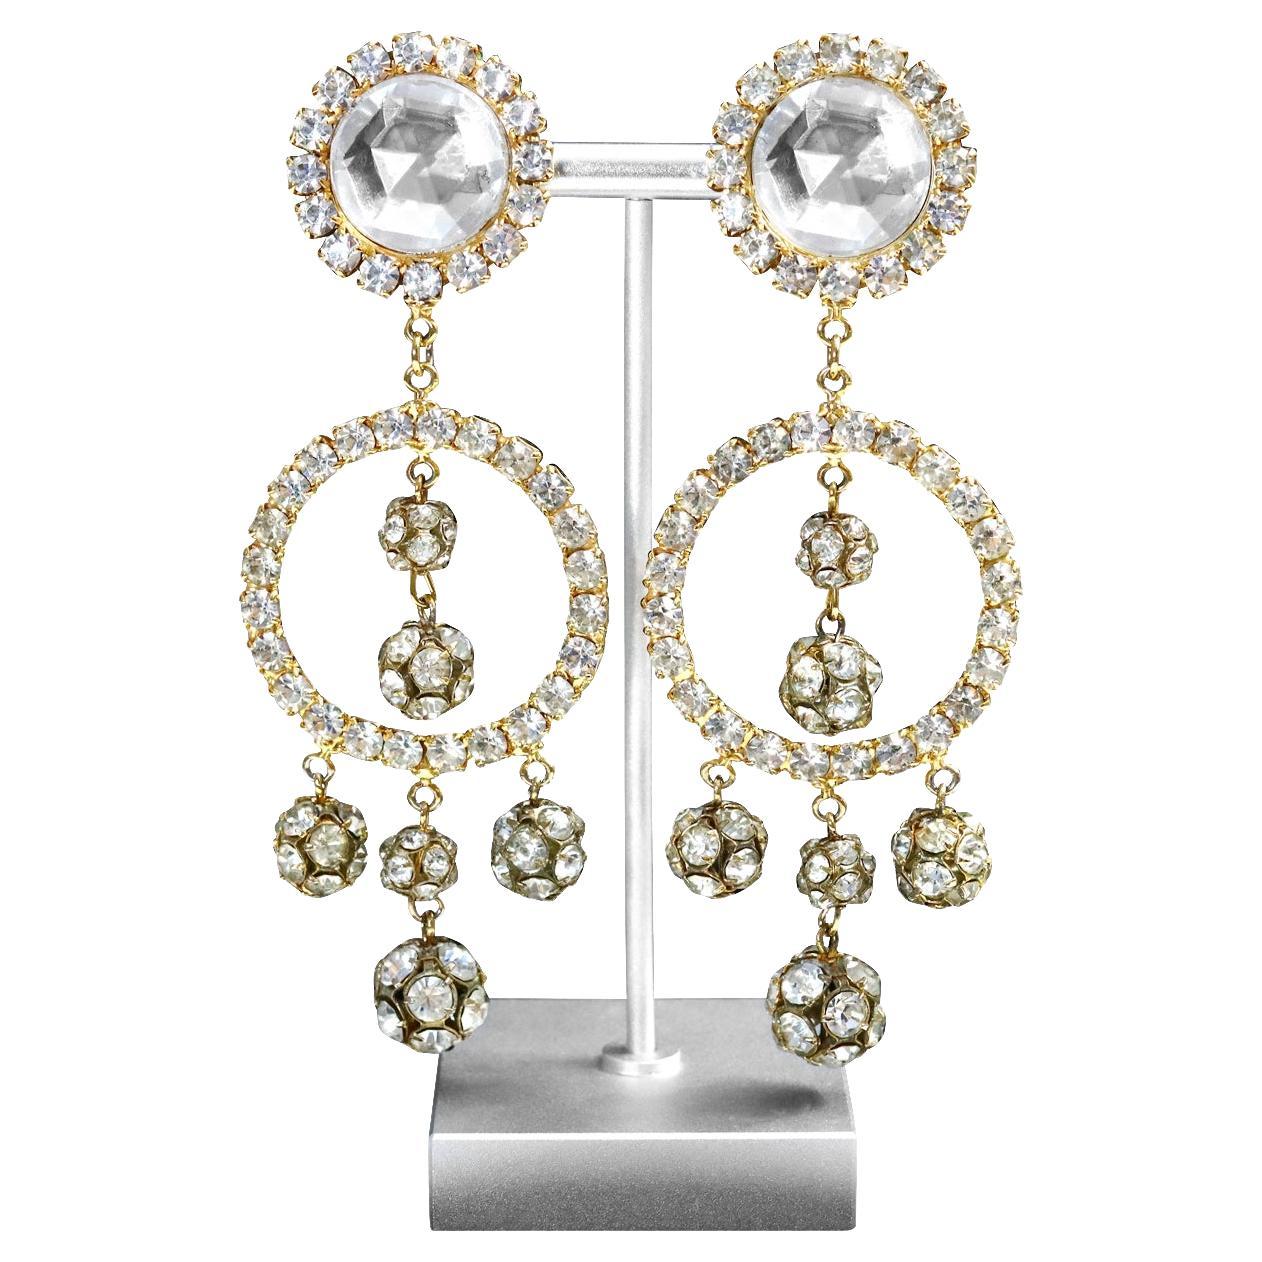 Vintage Gold Tone Diamante Long Dangling Earrings with Rondelles, Circa 1960s In Good Condition For Sale In New York, NY